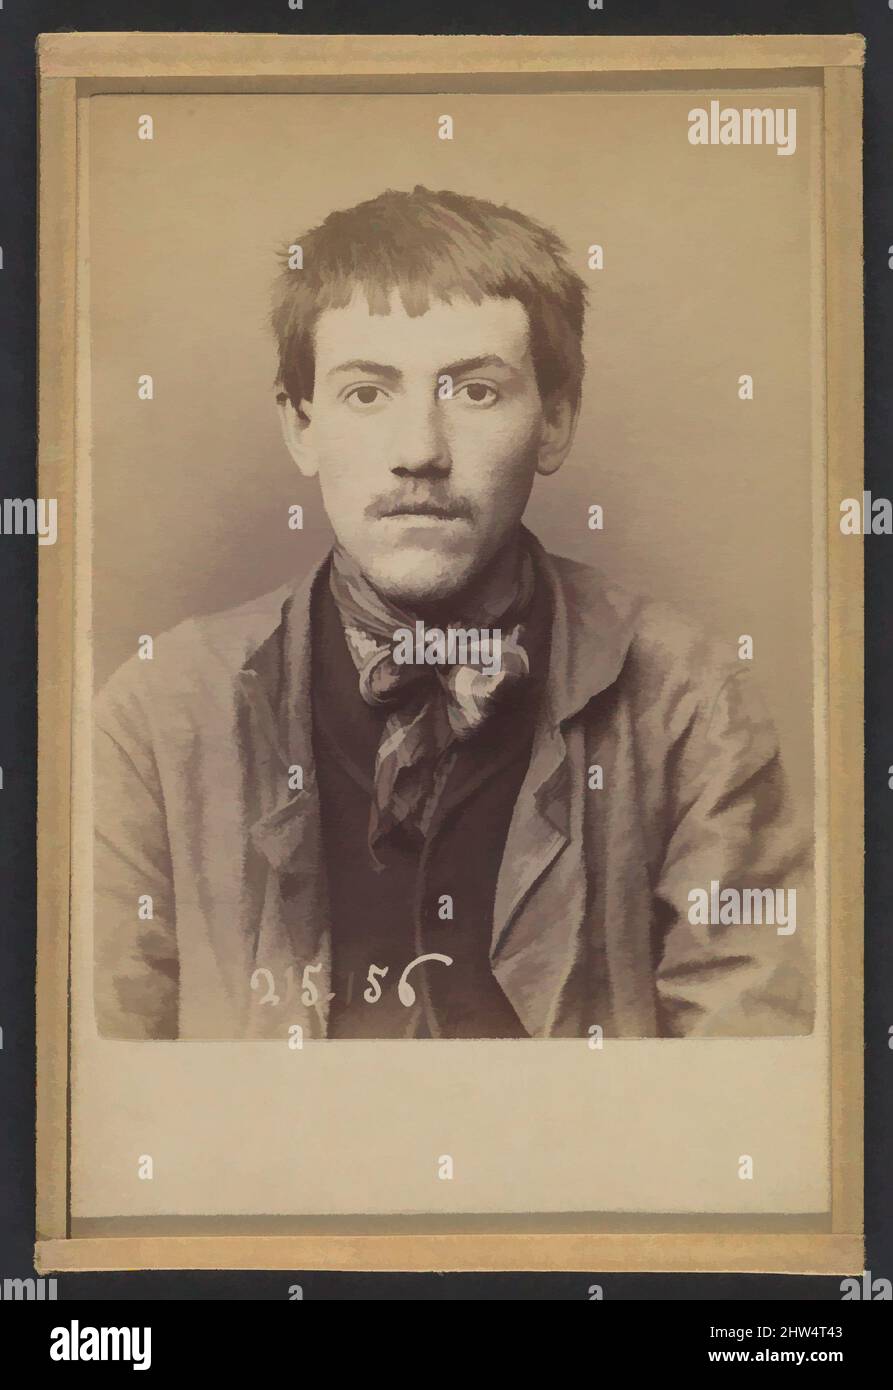 Art inspired by Bissonier. Sébastien. 19 ans, né à St Bonnet (Allier). Journalier. Outrage à la Gendarmerie. 5/3/94., 1894, Albumen silver print from glass negative, 10.5 x 7 x 0.5 cm (4 1/8 x 2 3/4 x 3/16 in.) each, Photographs, Alphonse Bertillon (French, 1853–1914), Born into a, Classic works modernized by Artotop with a splash of modernity. Shapes, color and value, eye-catching visual impact on art. Emotions through freedom of artworks in a contemporary way. A timeless message pursuing a wildly creative new direction. Artists turning to the digital medium and creating the Artotop NFT Stock Photo